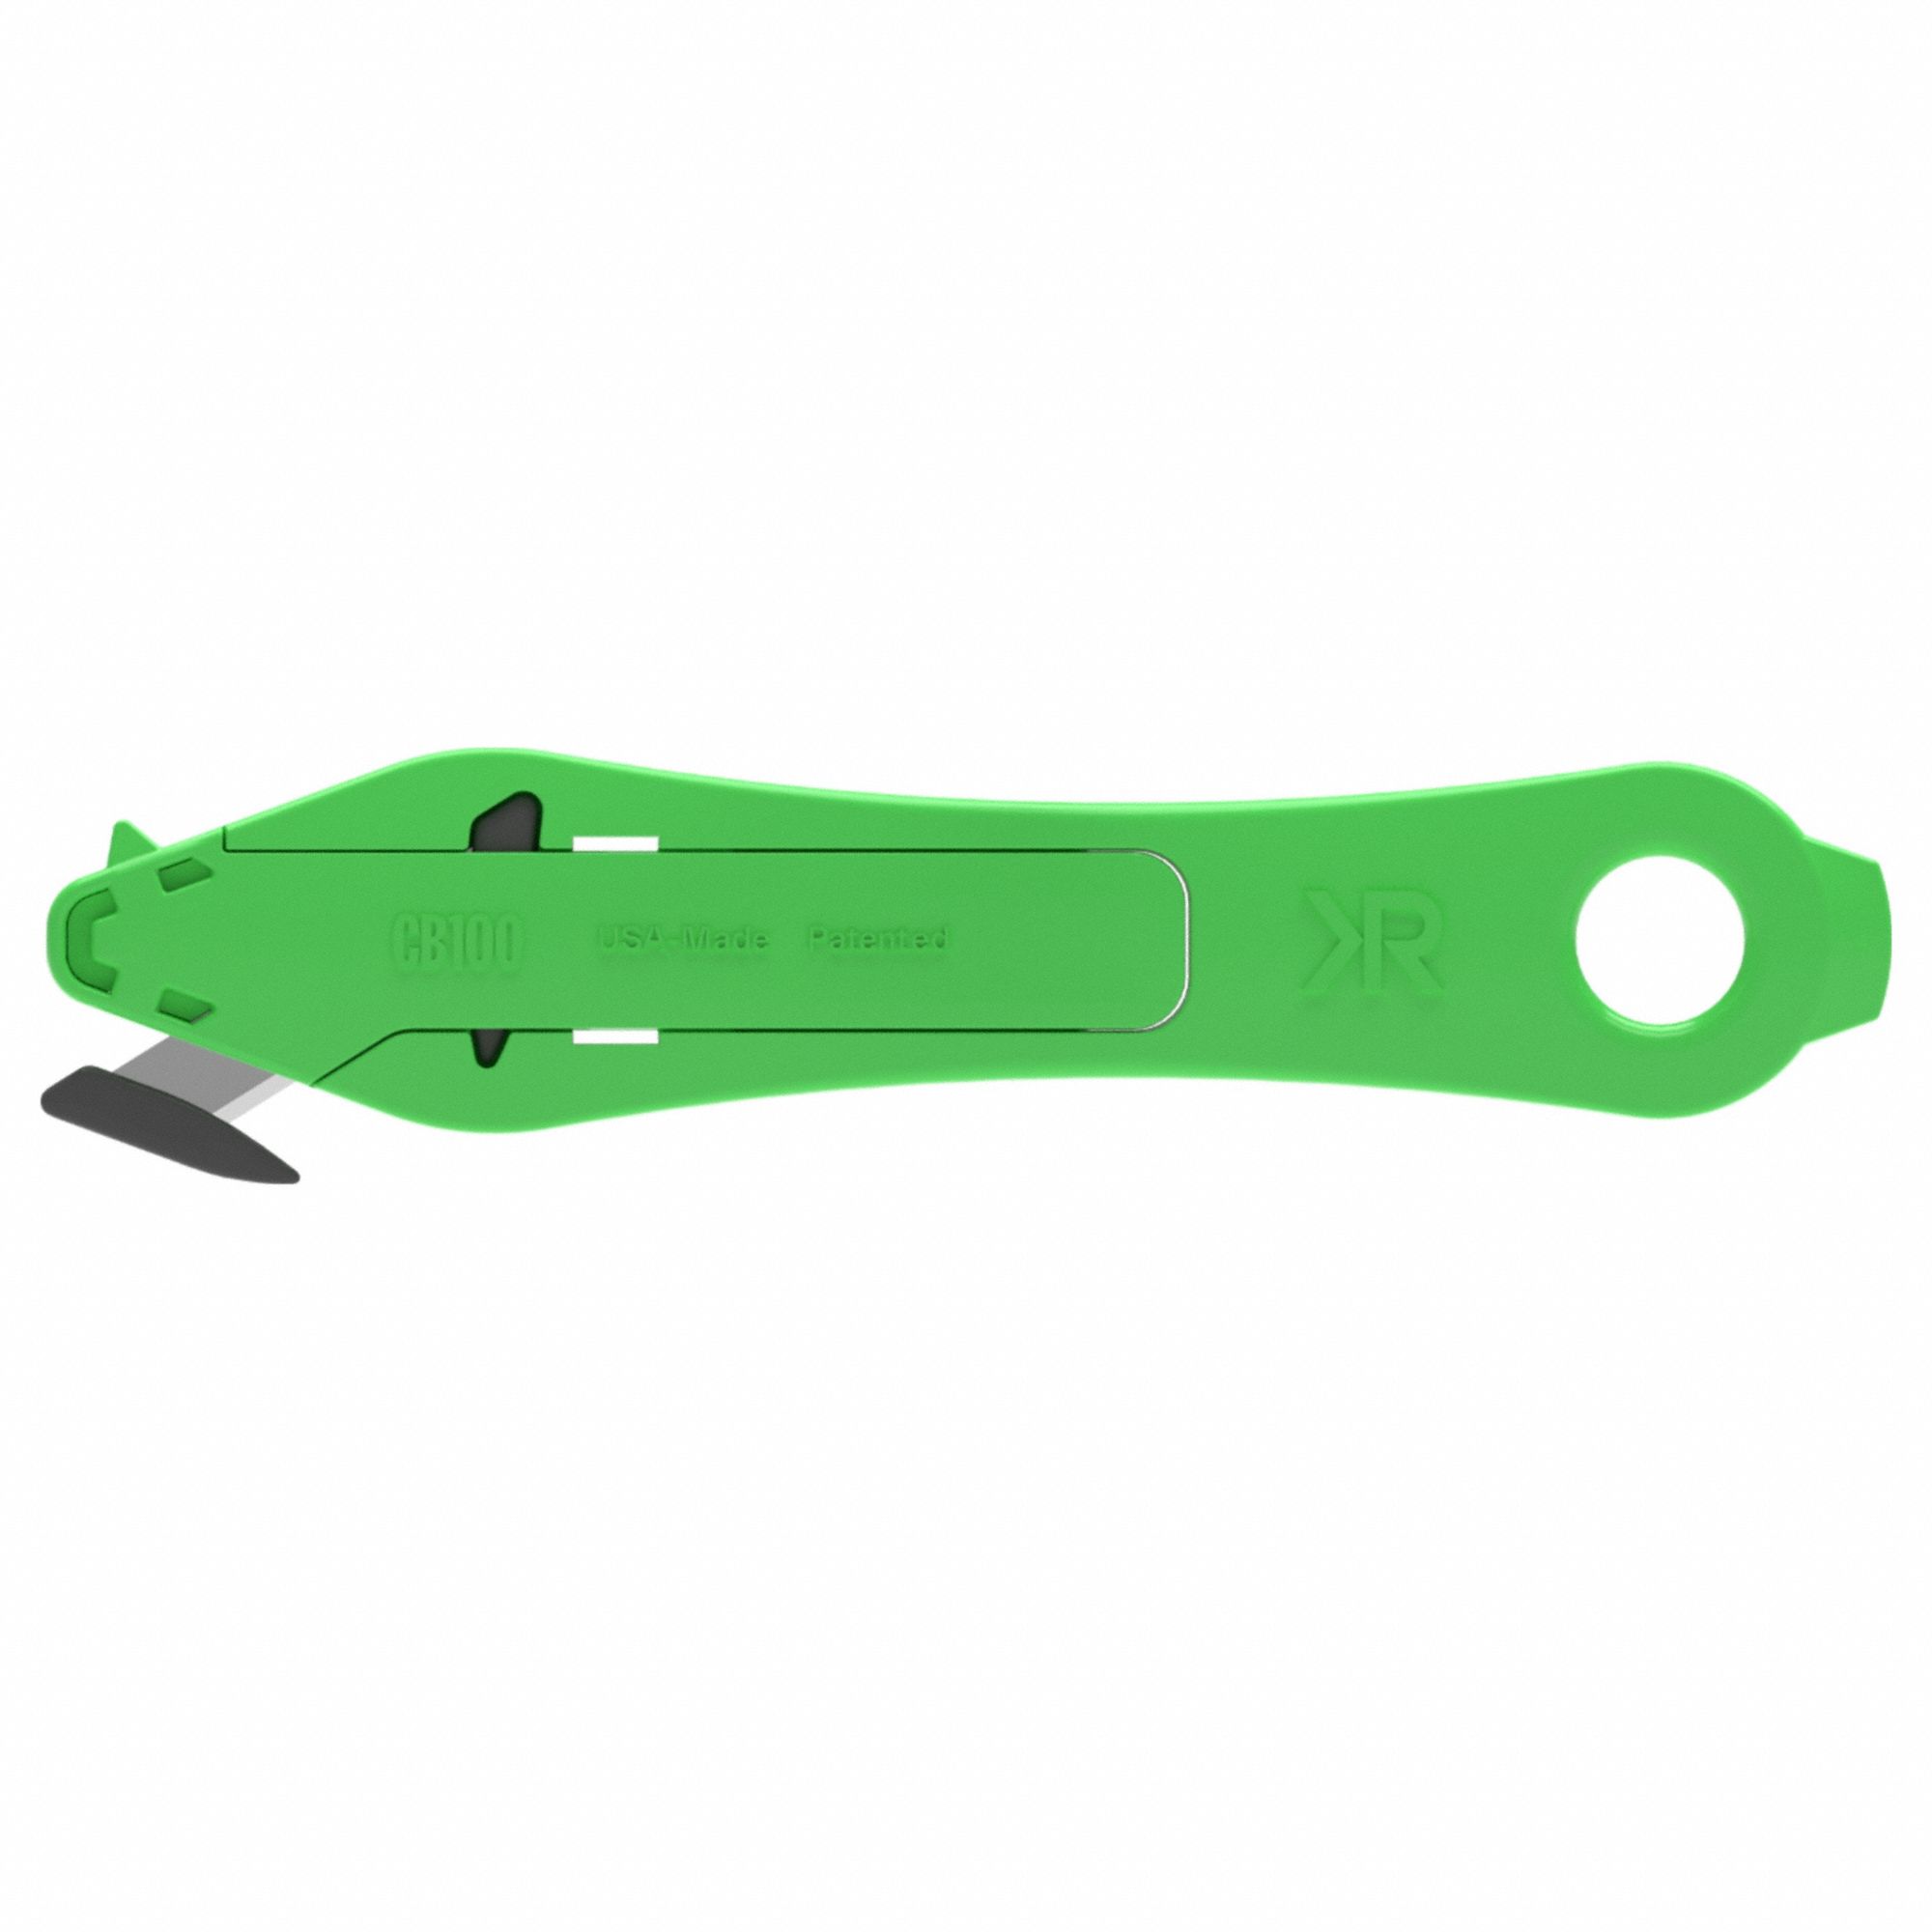 Hook Cutter: 7 7/8 in Overall Lg, Contoured Handle, Textured, Steel, Green